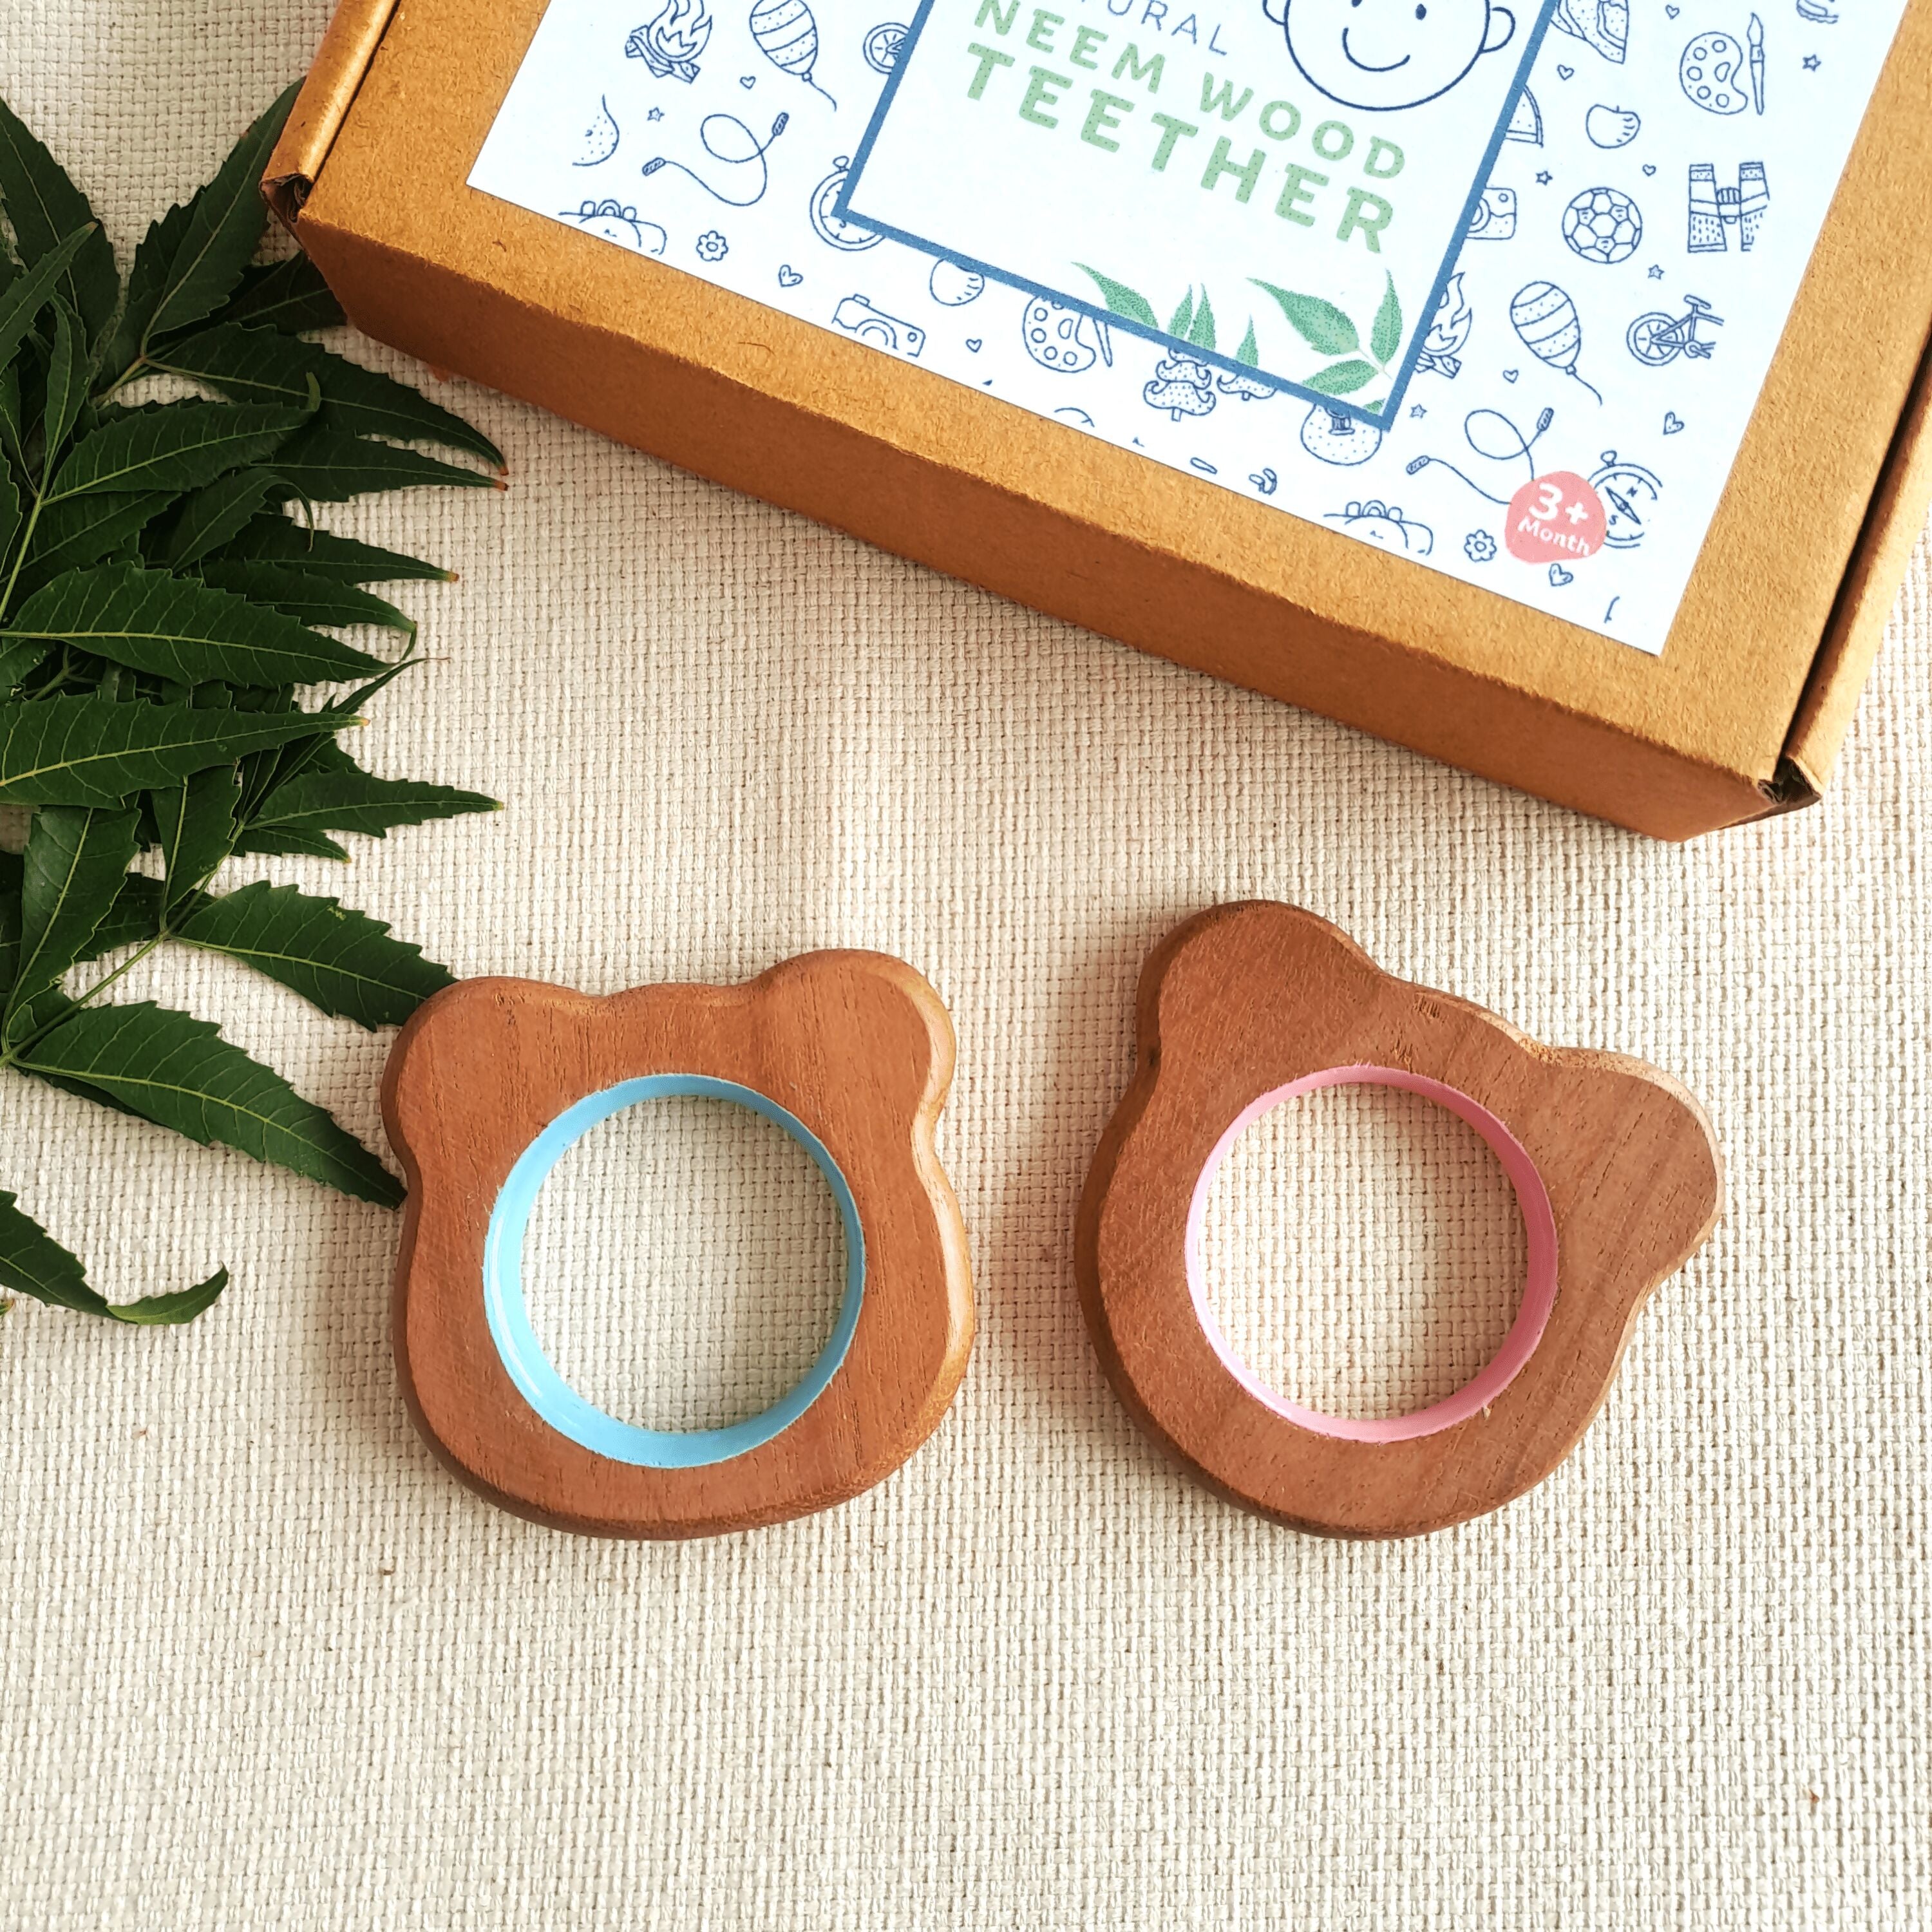 Explore shapes and soothe gums with Babycov's Cute Neem Wood Teethers - natural comfort for safe and playful chewing!